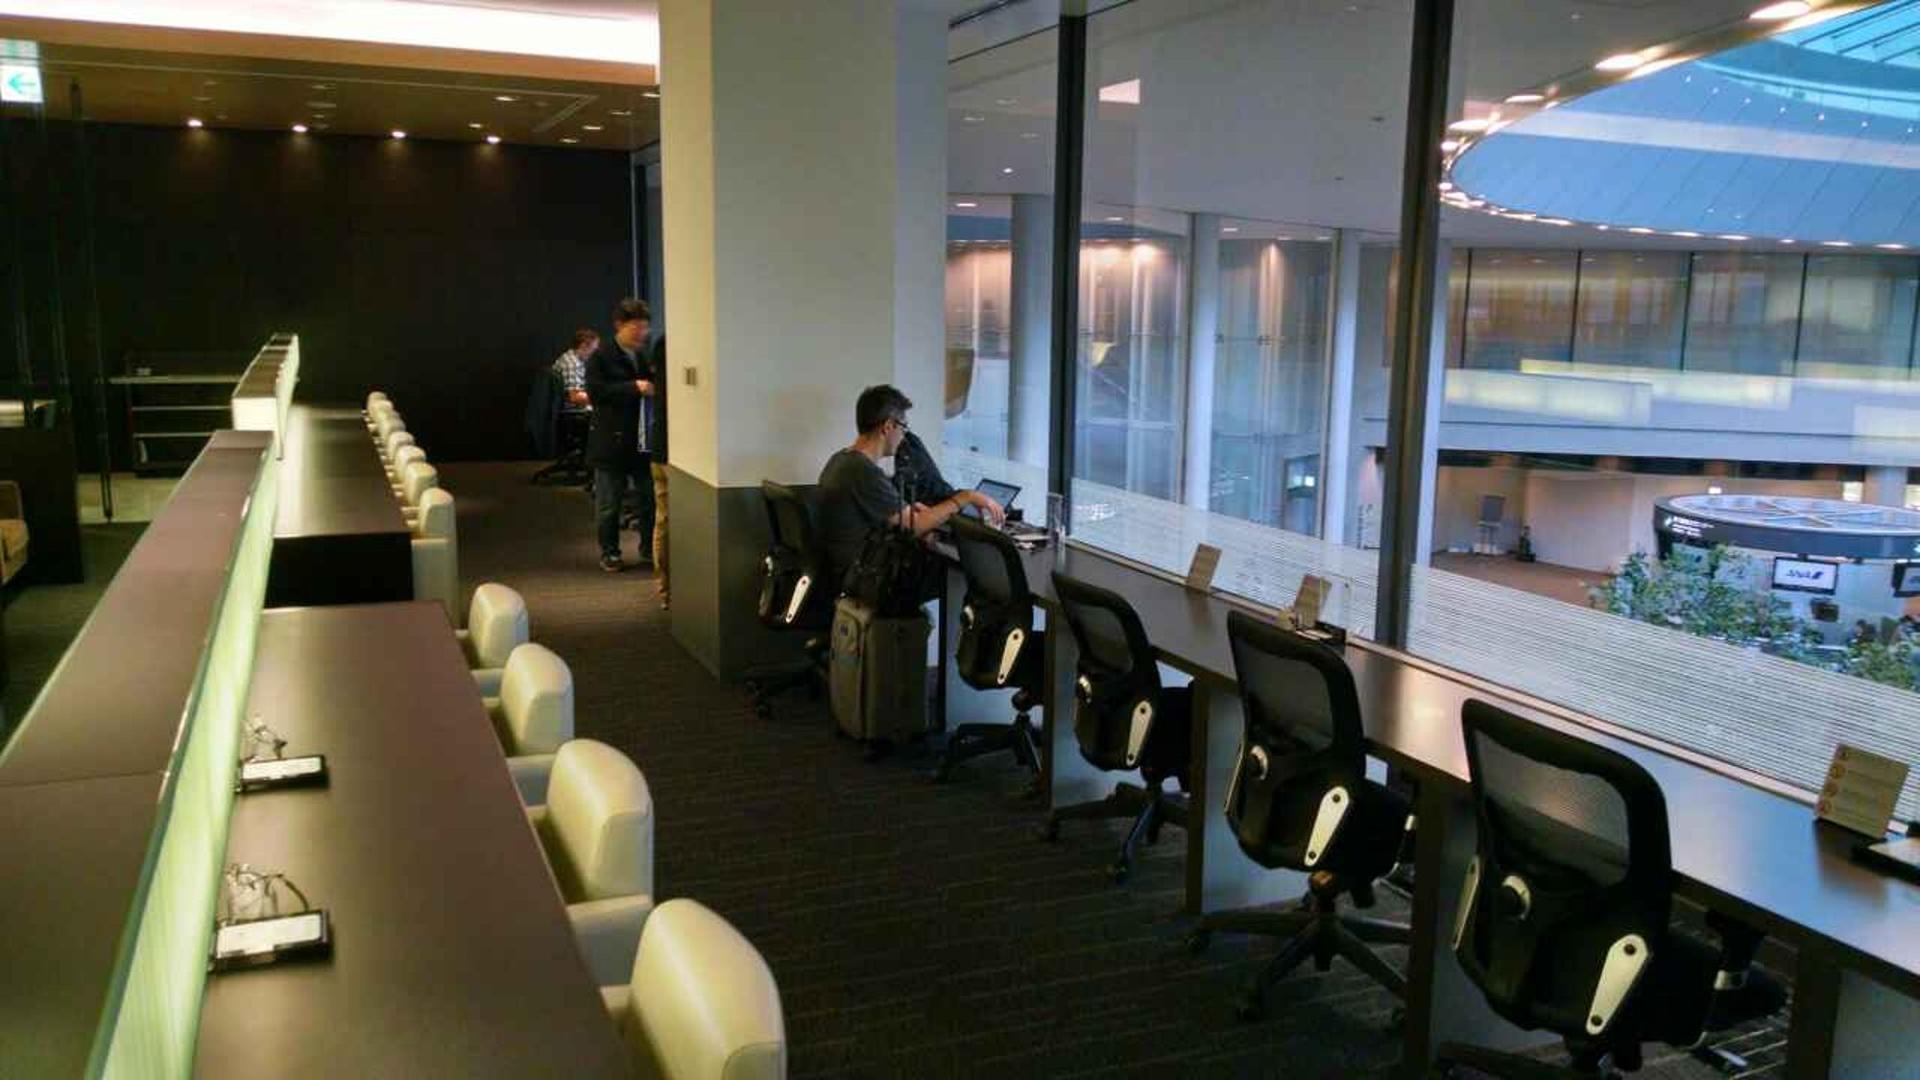 All Nippon Airways ANA Lounge image 16 of 39